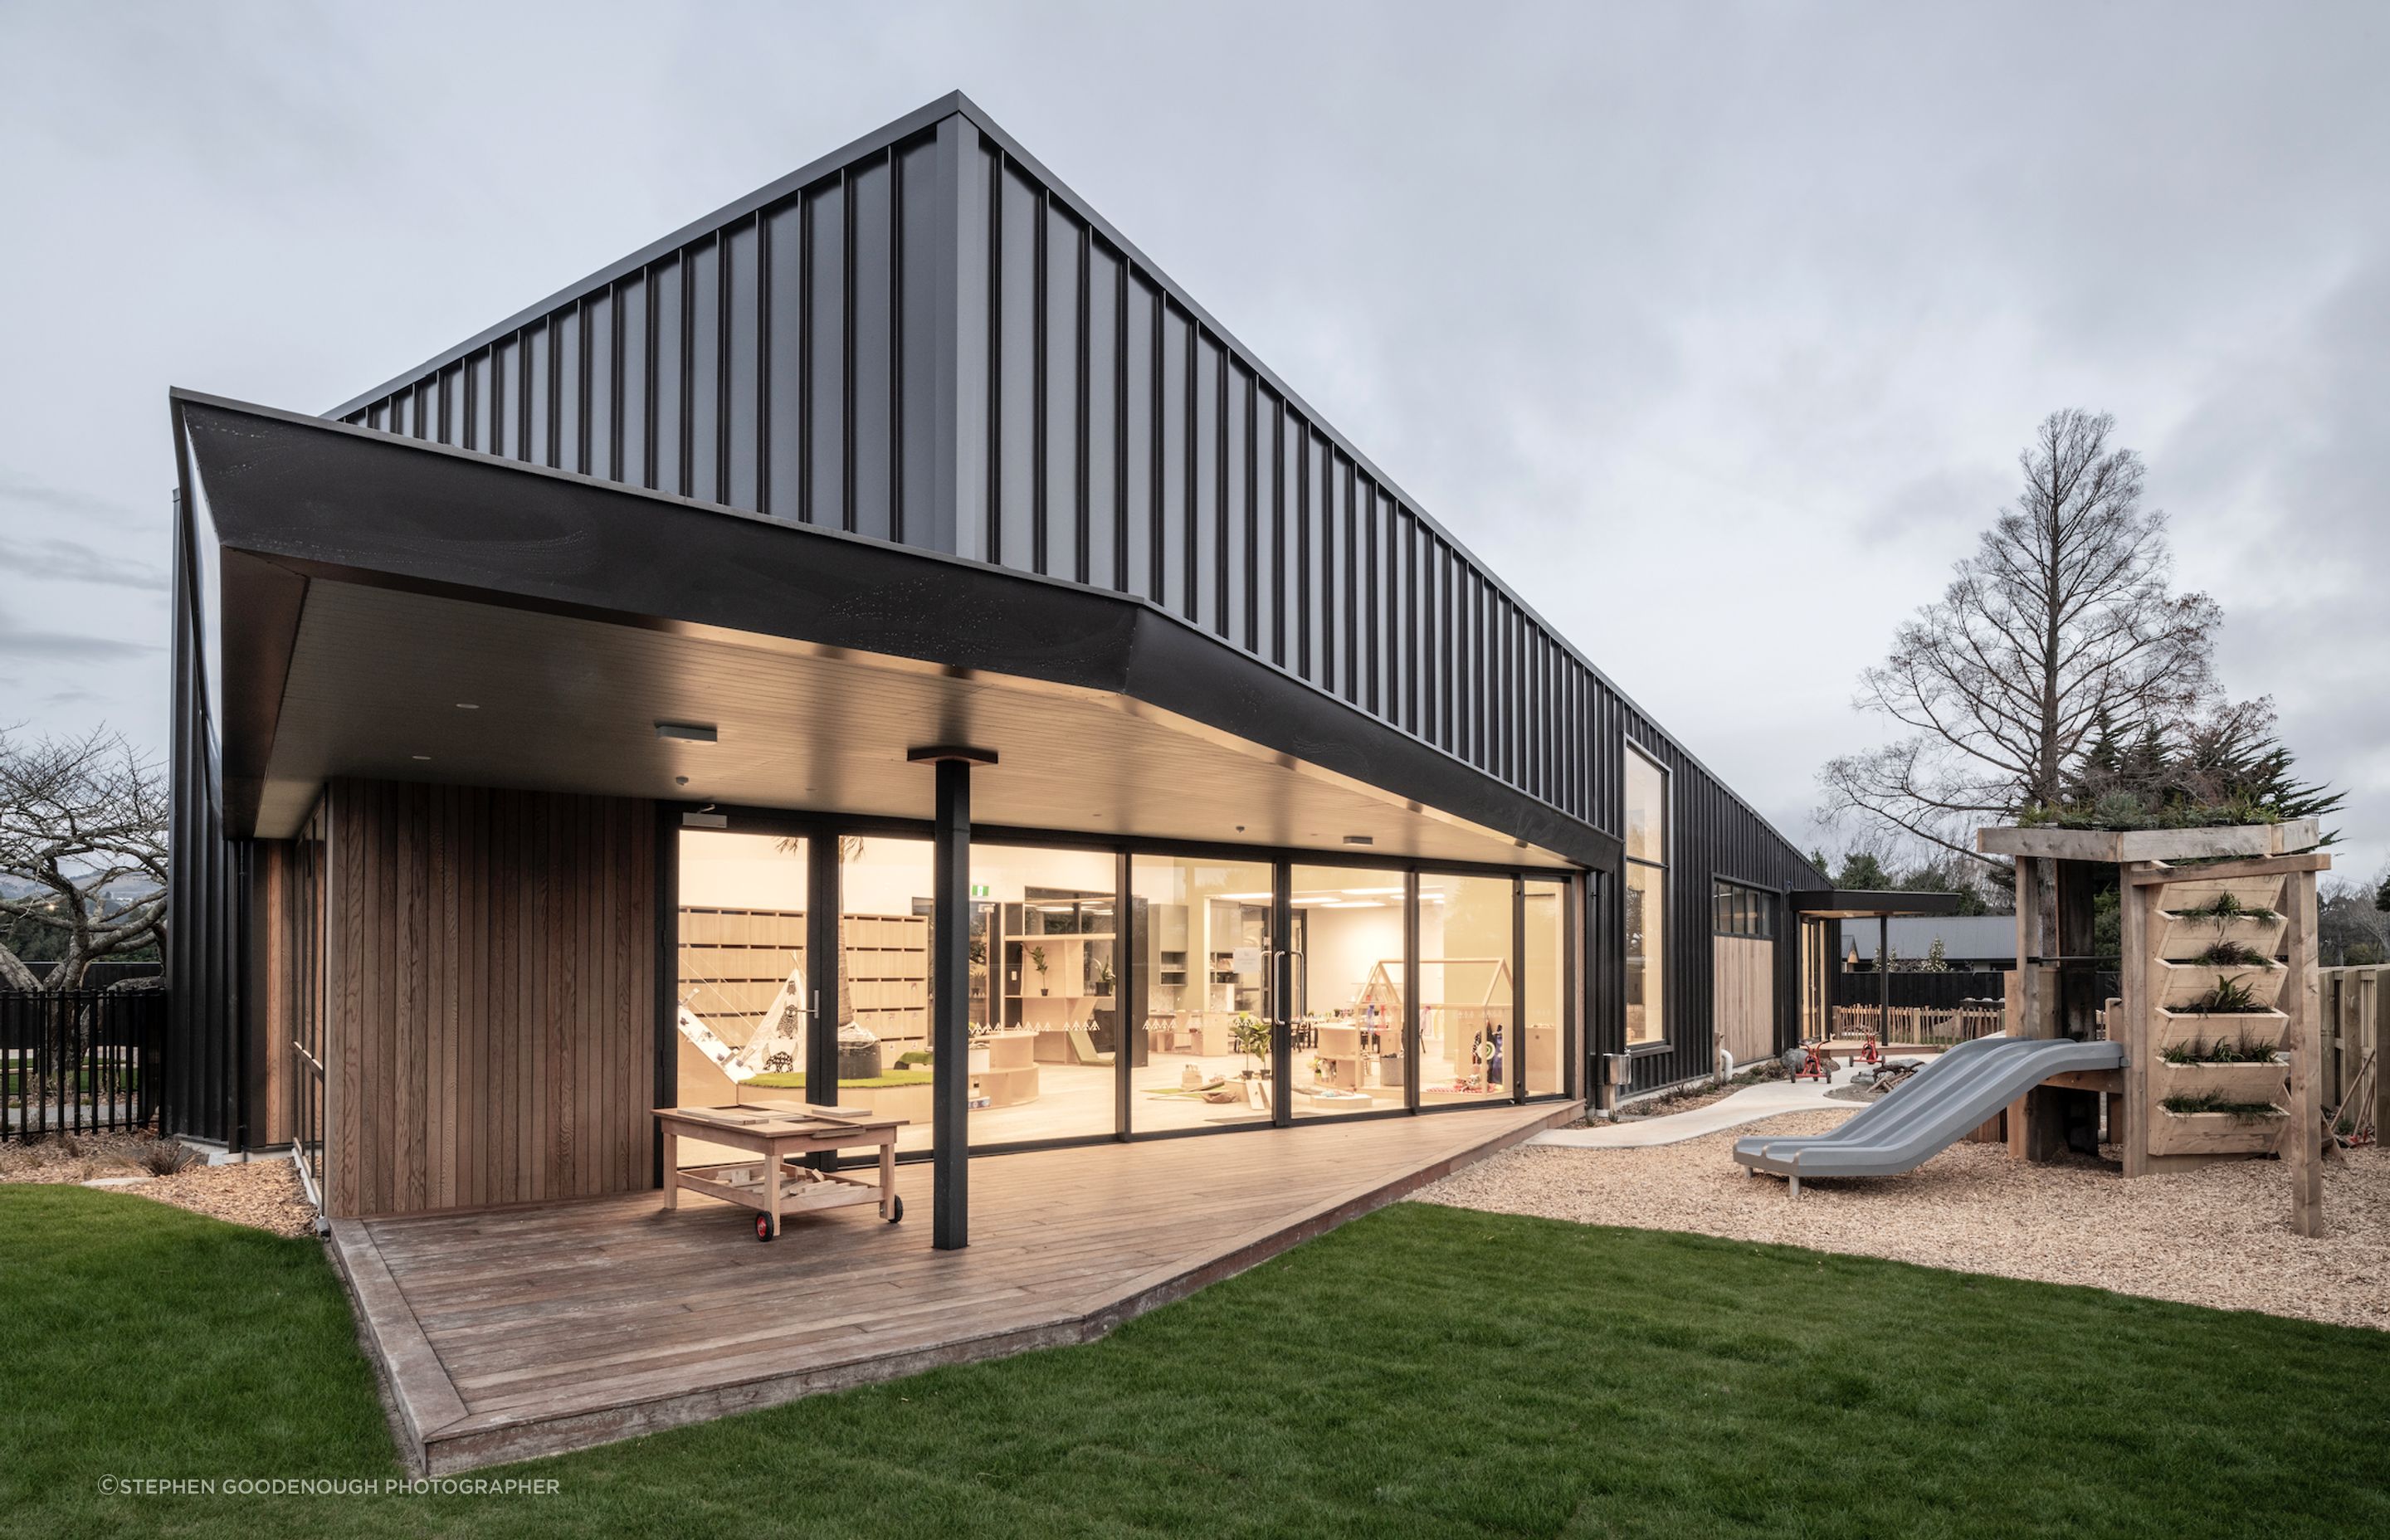 There’s something so well thought out about the way South Architects have gone about this space – the central courtyard connotes a feeling of connection, of community, and togetherness.